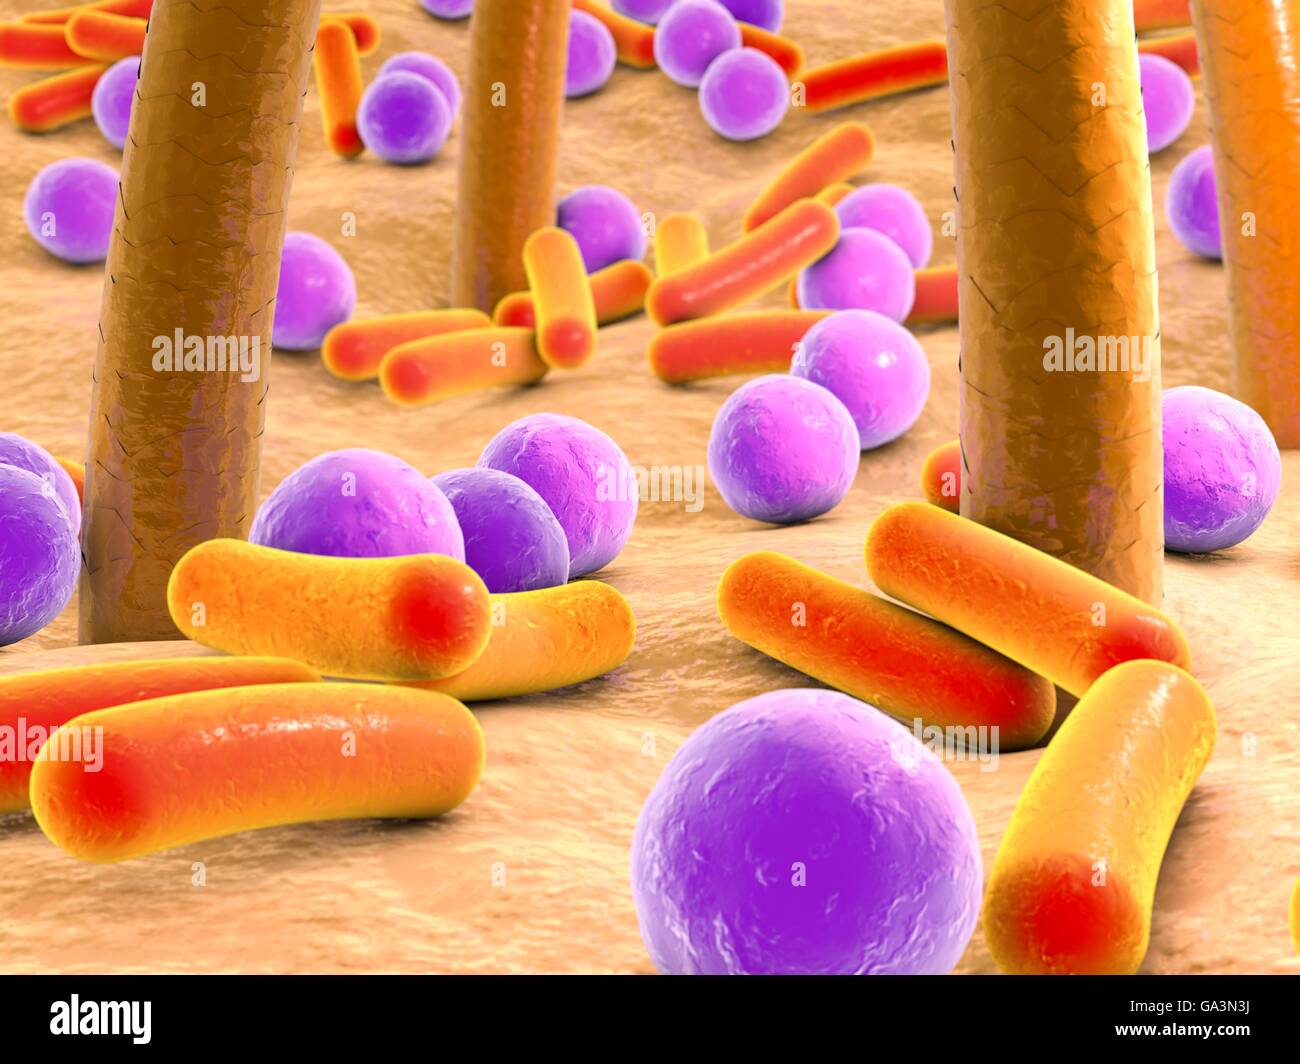 Bacteria on skin with hairs. Computer artwork of bacteria (purple and orange) on human skin. Many types of bacteria are found on human skin, especially associated with sweat glands and hair follicles. They usually cause no problems, although some can cause acne. Bacteria usually only become a problem if they penetrate the skin, for example through a wound or cut. Stock Photo